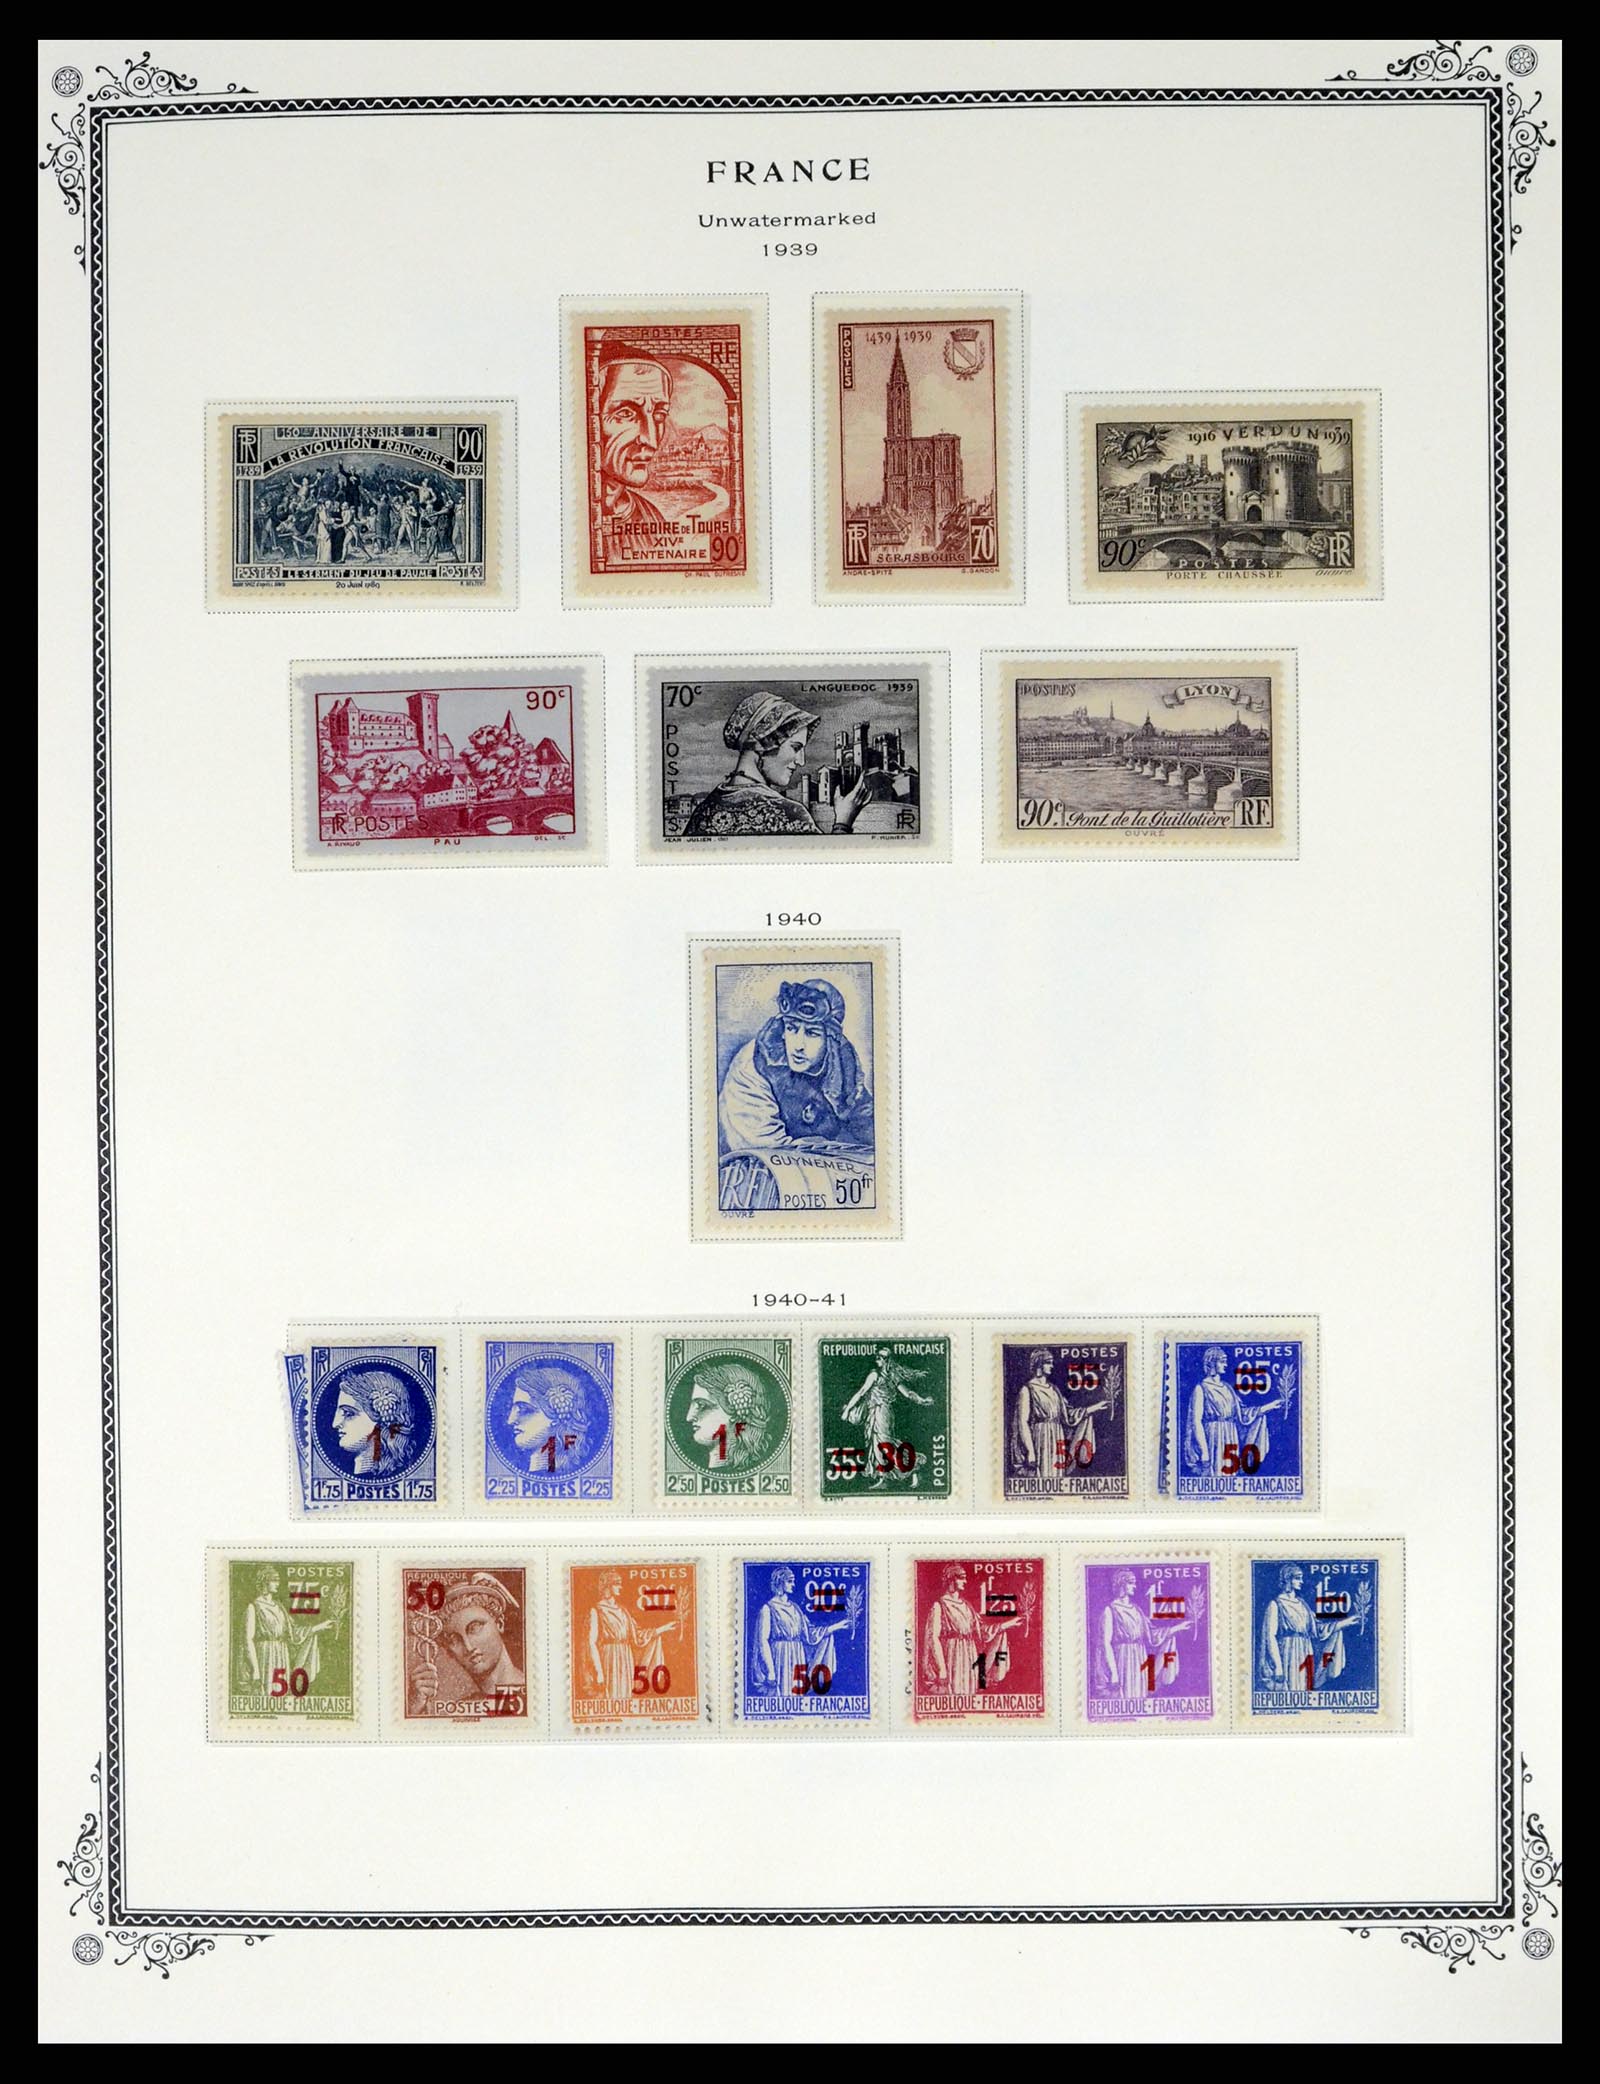 37632 015 - Stamp collection 37632 France 1849-2001.